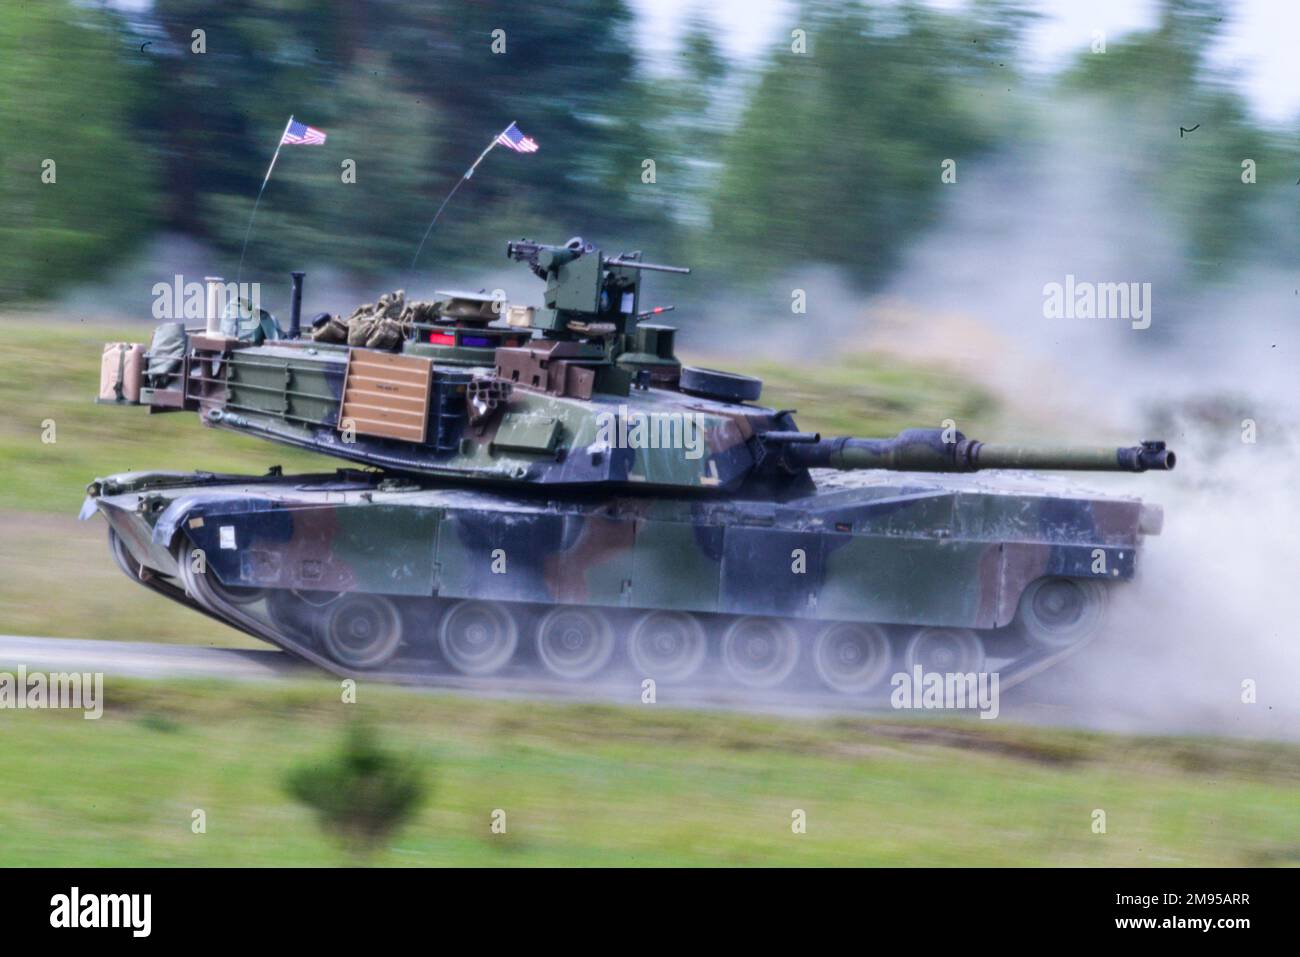 Handout file photo dated May 11, 2016 shows U.S. Soldiers, assigned to the 3rd Infantry Division, move to their battle position in a M1 Abrams tank during the Strong Europe Tank Challenge in Grafenwoehr, Germany. Multiple European nations for the first time answered President Volodymyr Zelensky’s longstanding call to supply modern battle tanks to Kyiv. France, Poland and the United Kingdom have pledged to soon send tanks for the Ukrainian military to use in its efforts to protect itself from Russia. Finland is considering following suit. Photo by U.S. Army via ABACAPRESS.COM Stock Photo